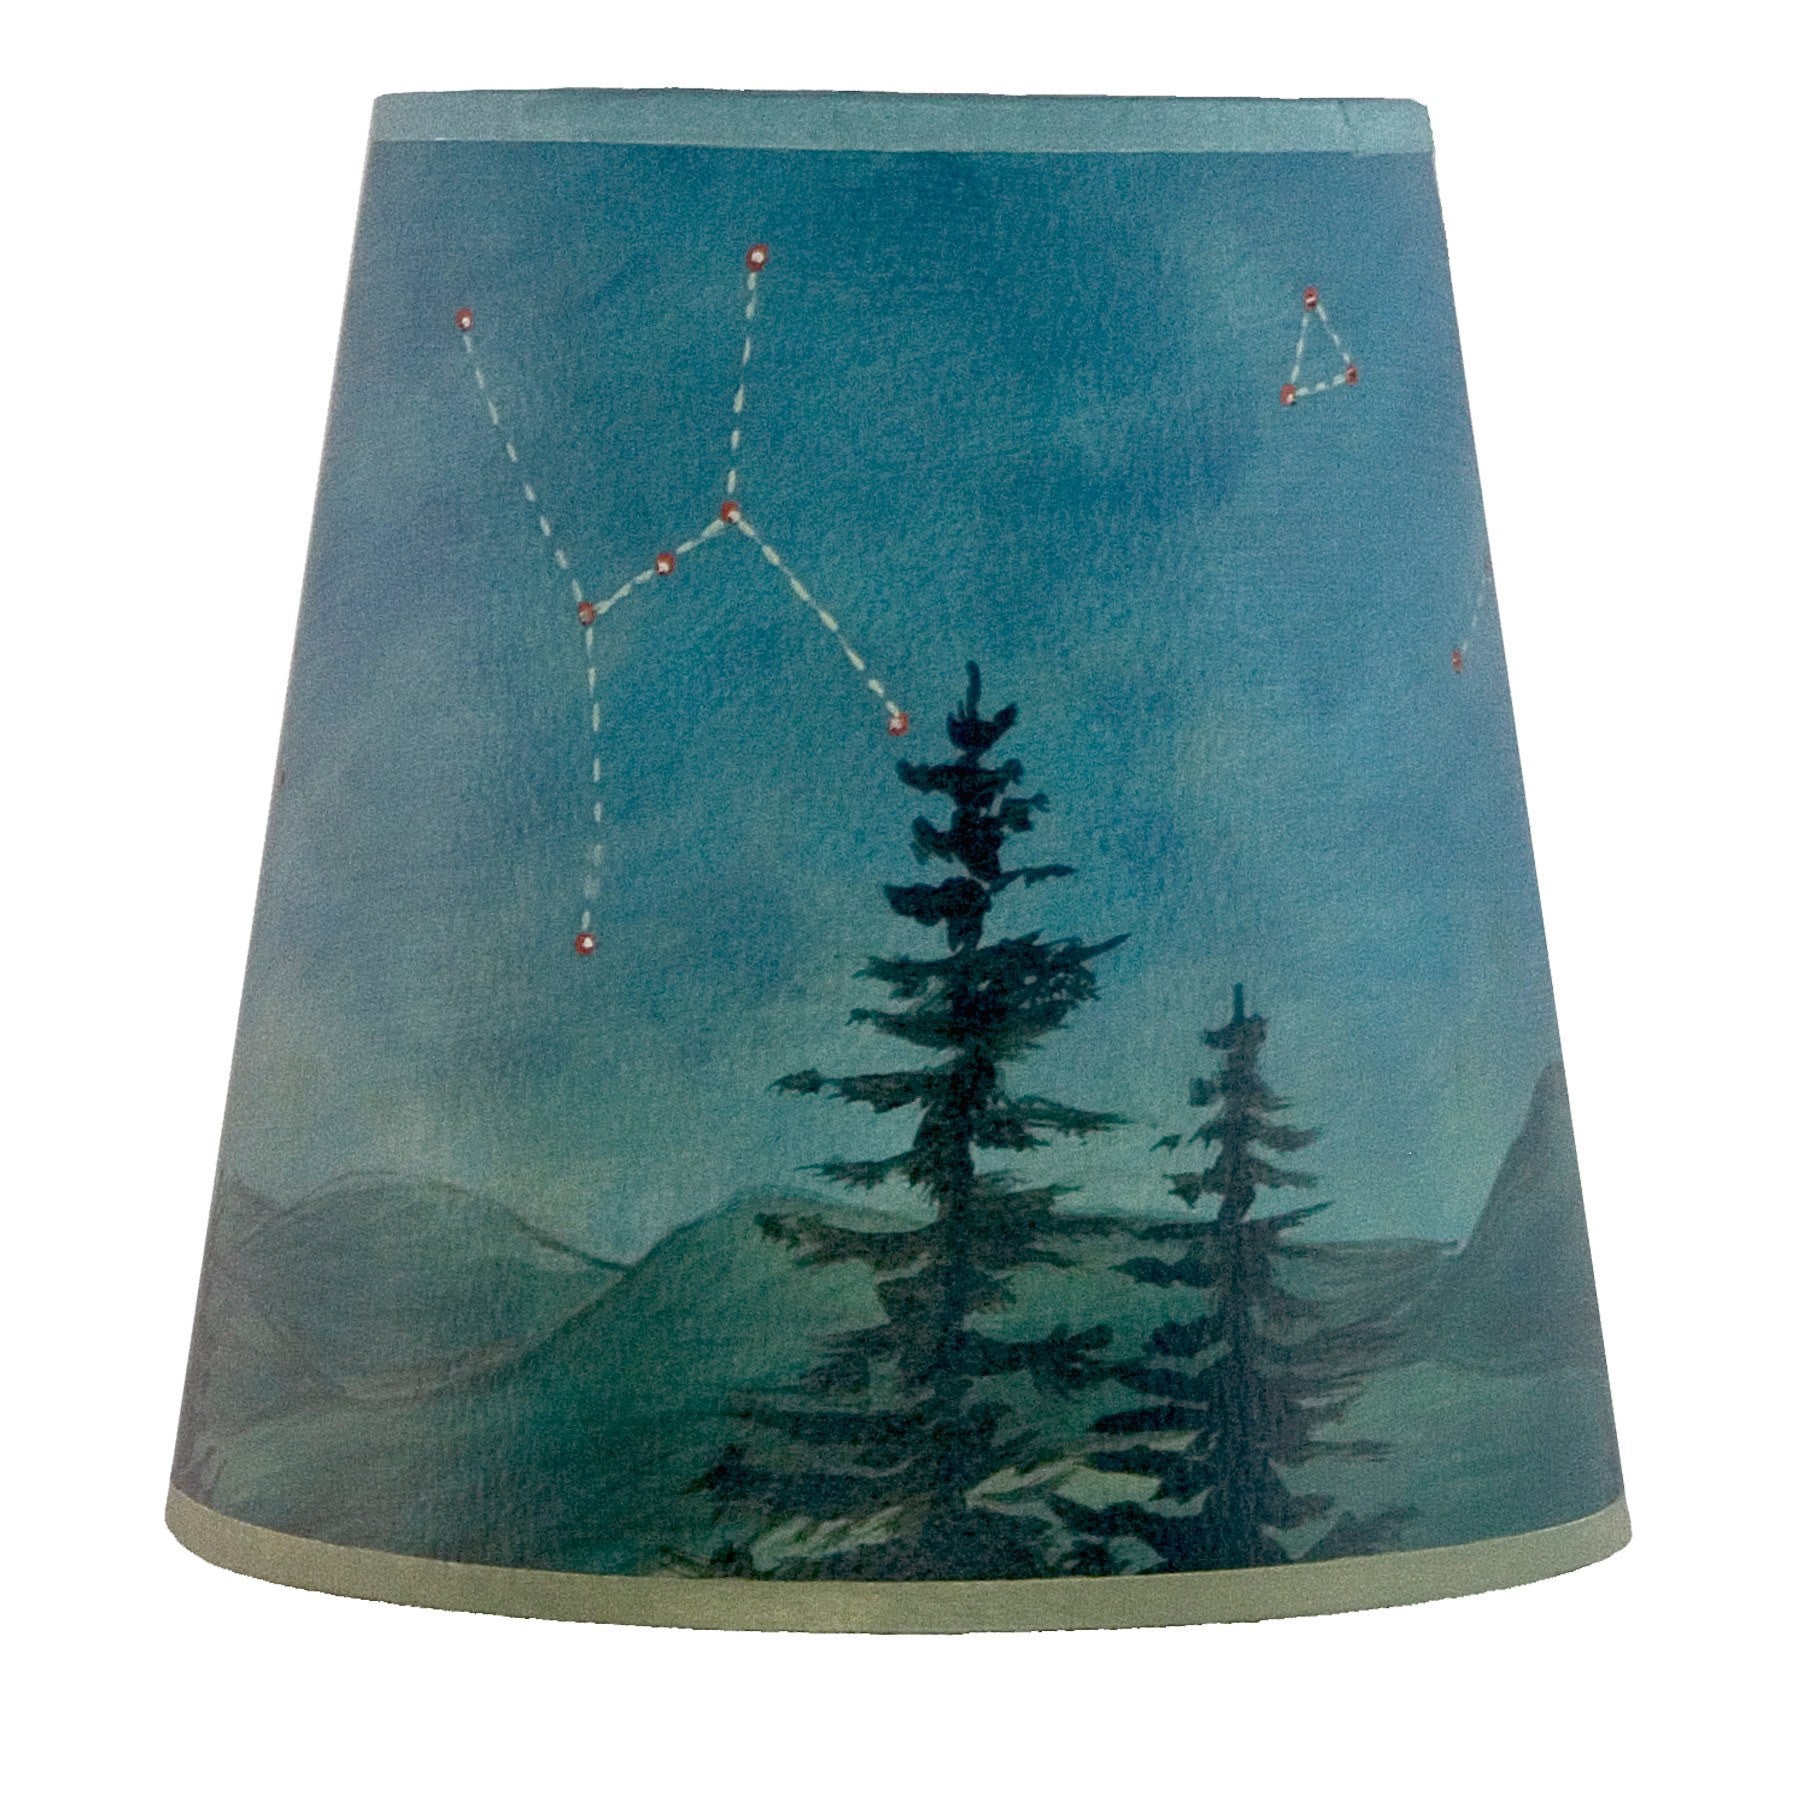 Janna Ugone & Co Lamp Shades Small Drum Lamp Shade in Midnight Sky